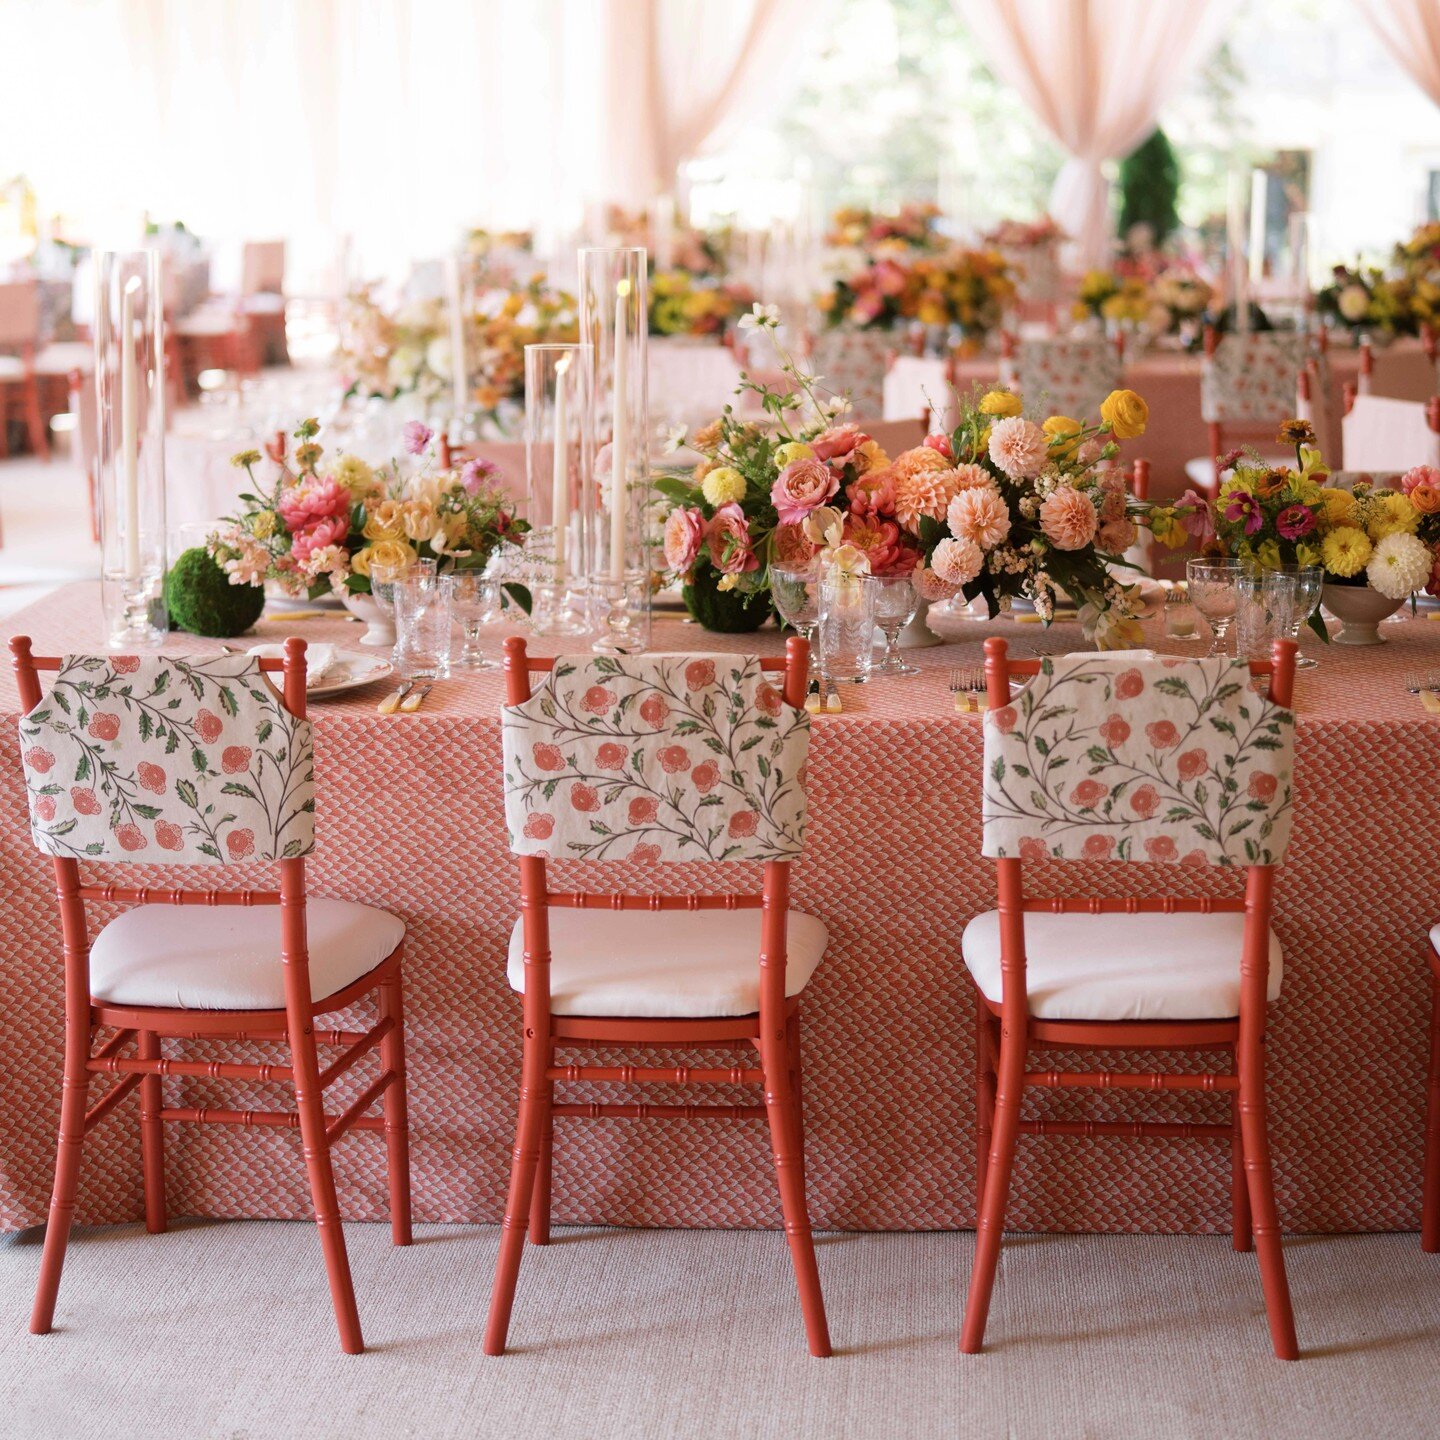 This once empty tent was magically transformed into a tailored expression of our bride and groom's warmth. Upholstered banquettes, backed with an explosion of fresh &quot;growing&quot; floral lined the walls, creating a cozy intimate atmosphere. One 